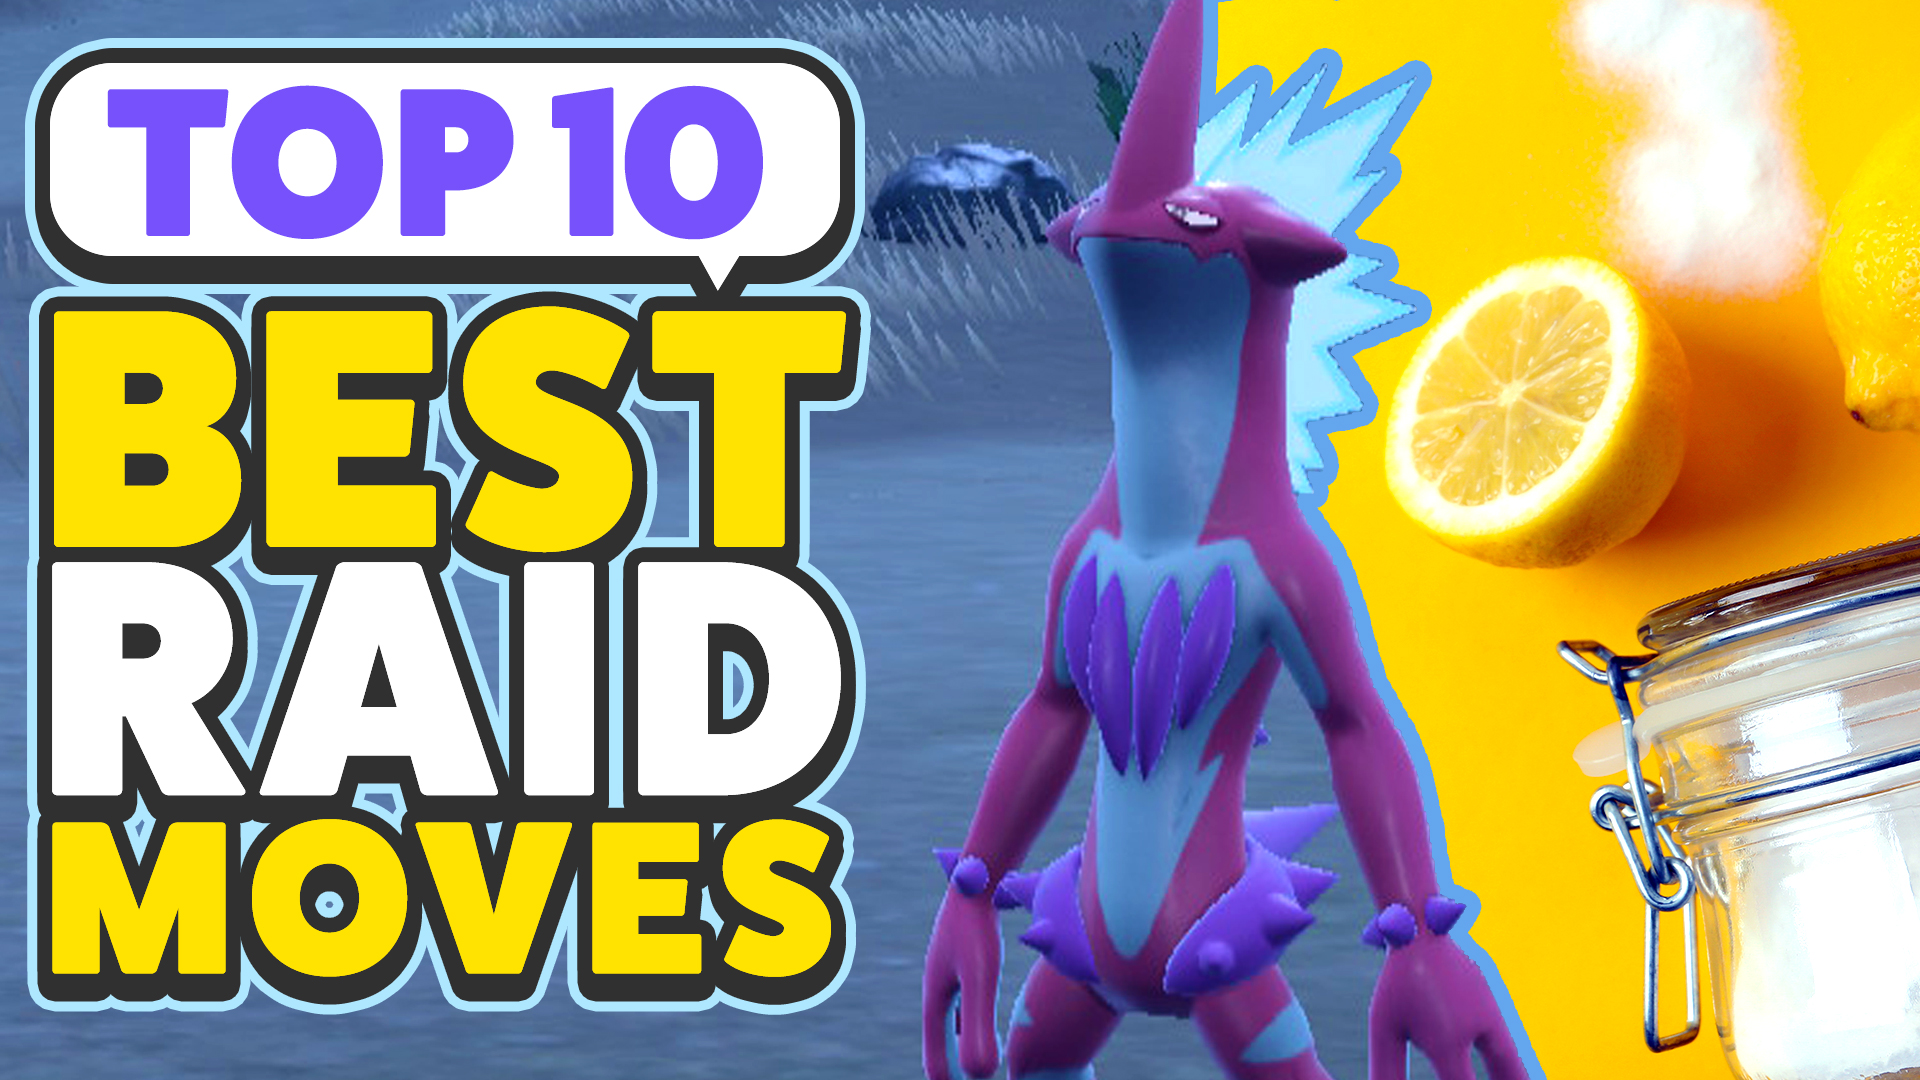 Frosset Sanktion kærlighed PKMNcast on Twitter: "Here are my Top 10 moves you should be using in Pokémon  Raids! I build a lot of my Pokémon around these 10 moves! WATCH:  https://t.co/Vw6VvDlE3t 🍋 https://t.co/QttP8hbSd8" /